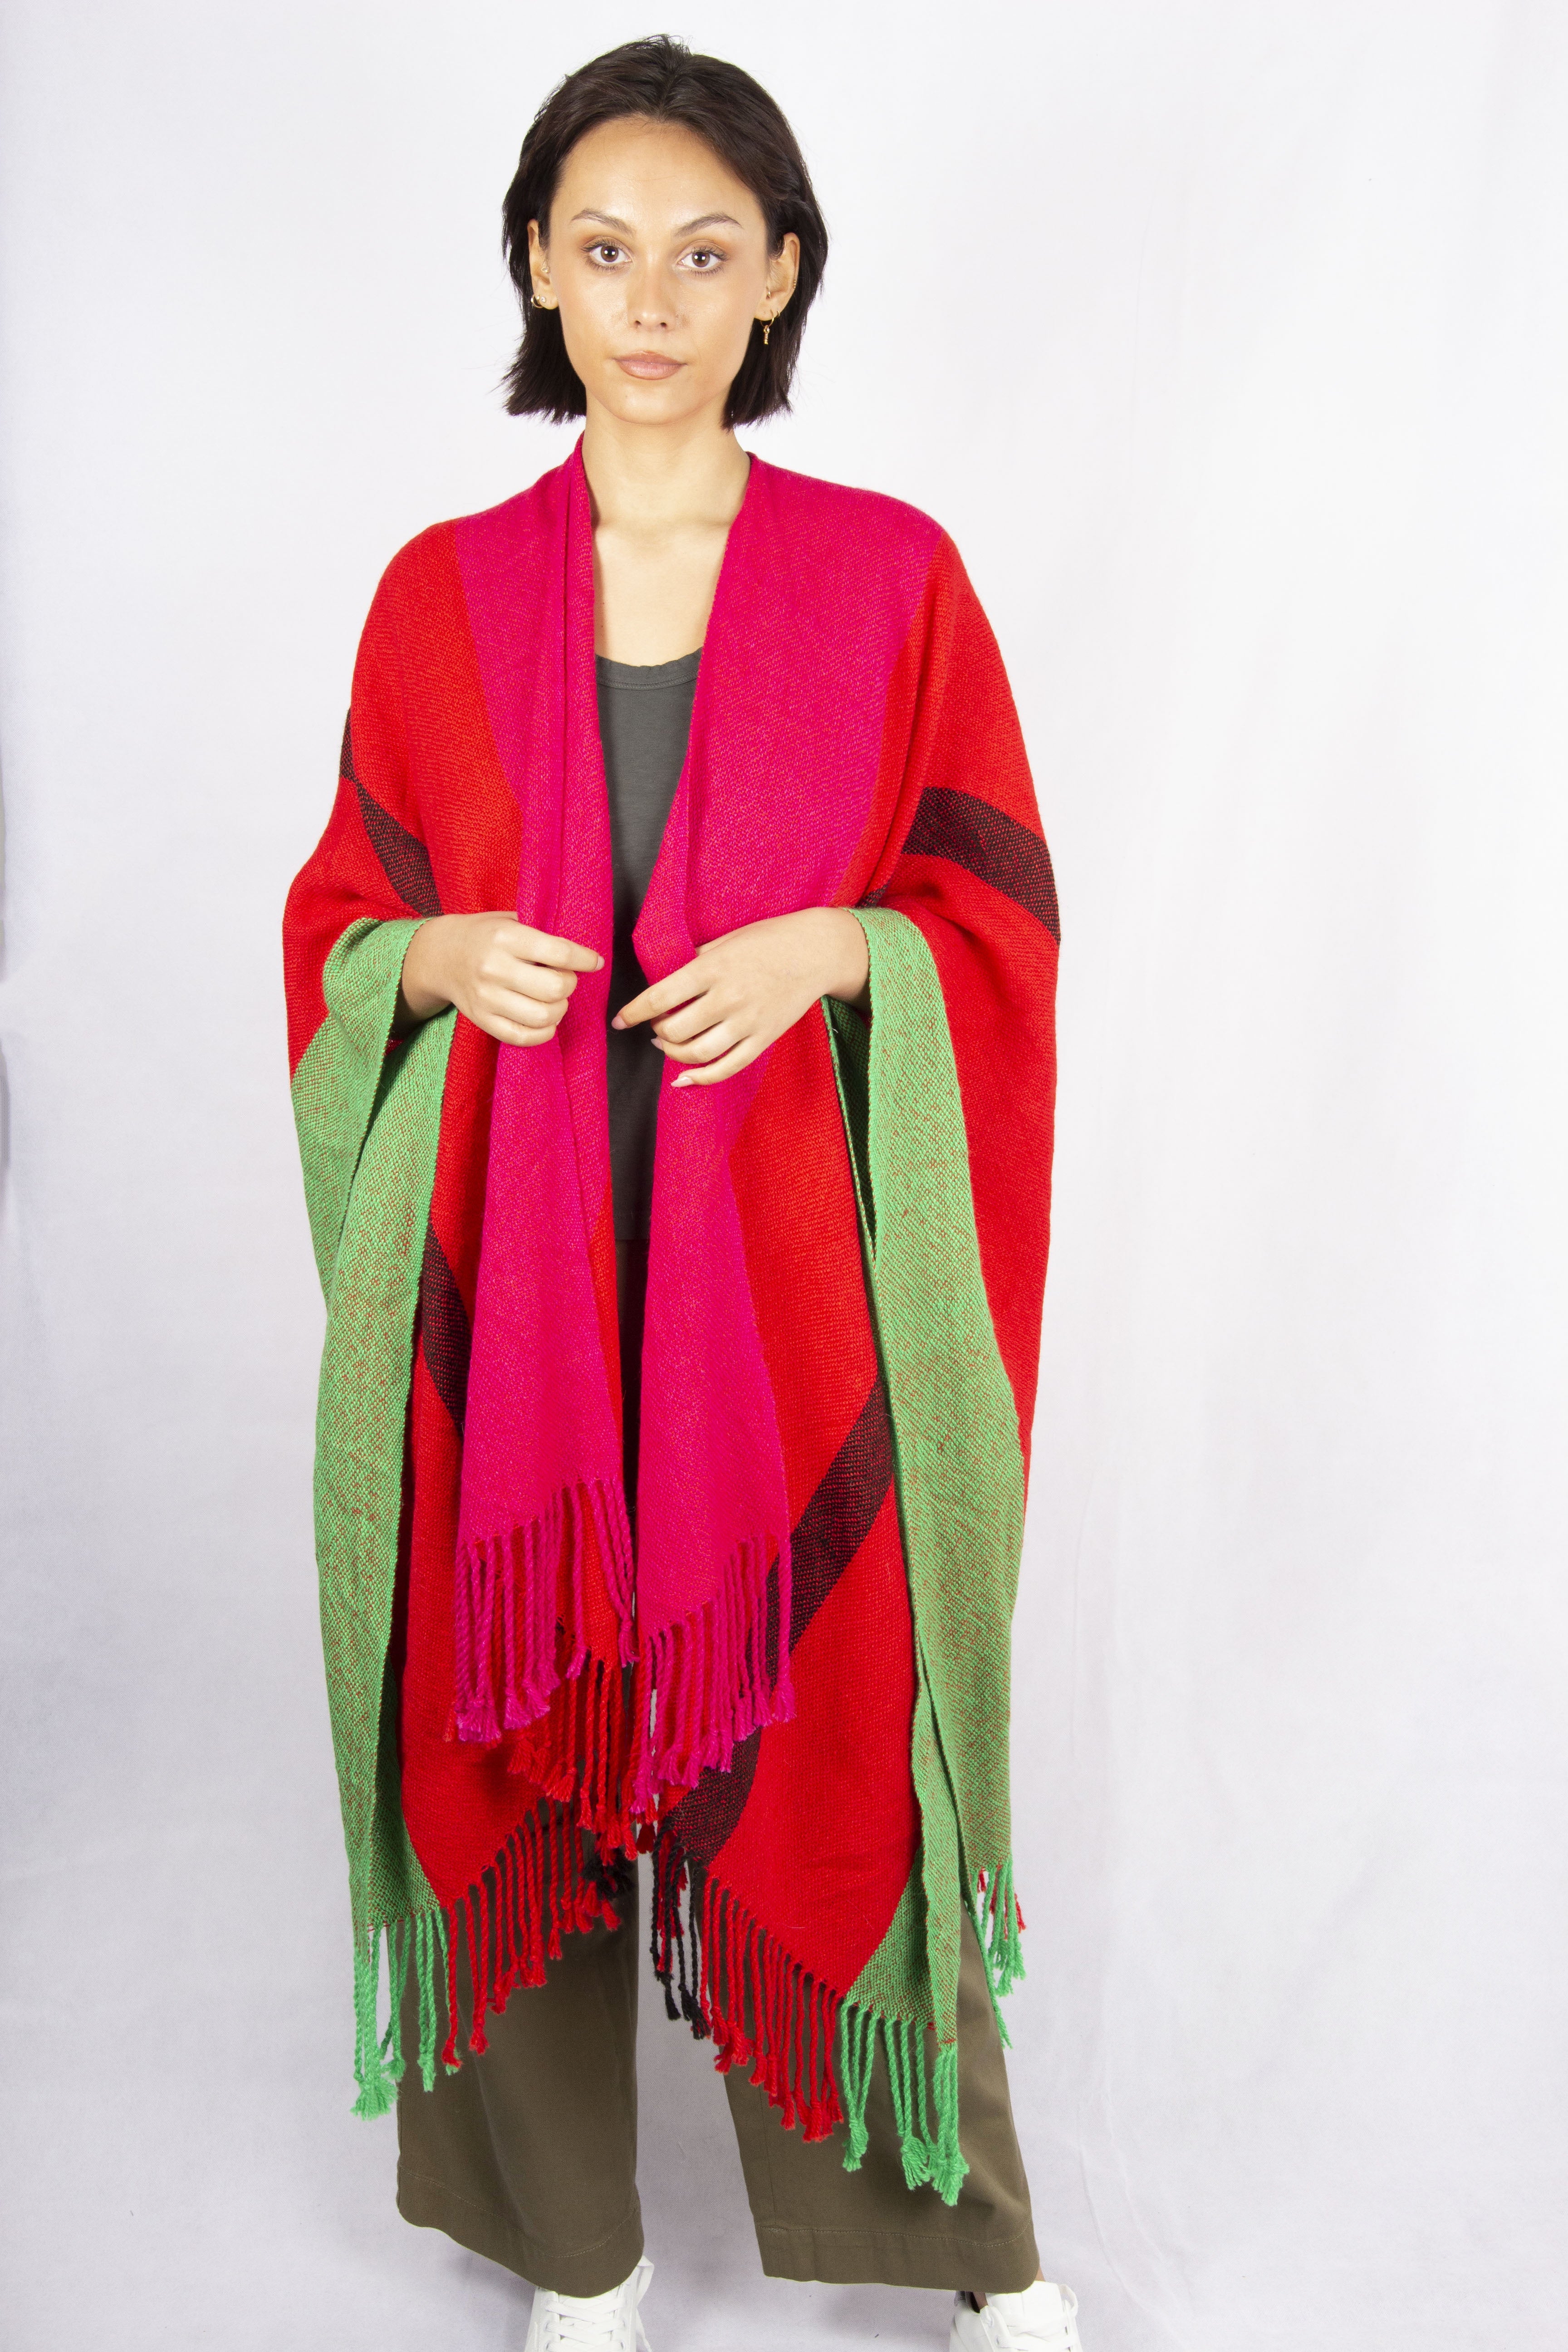 EDC Multicoloured Poncho in Red Pink and Green